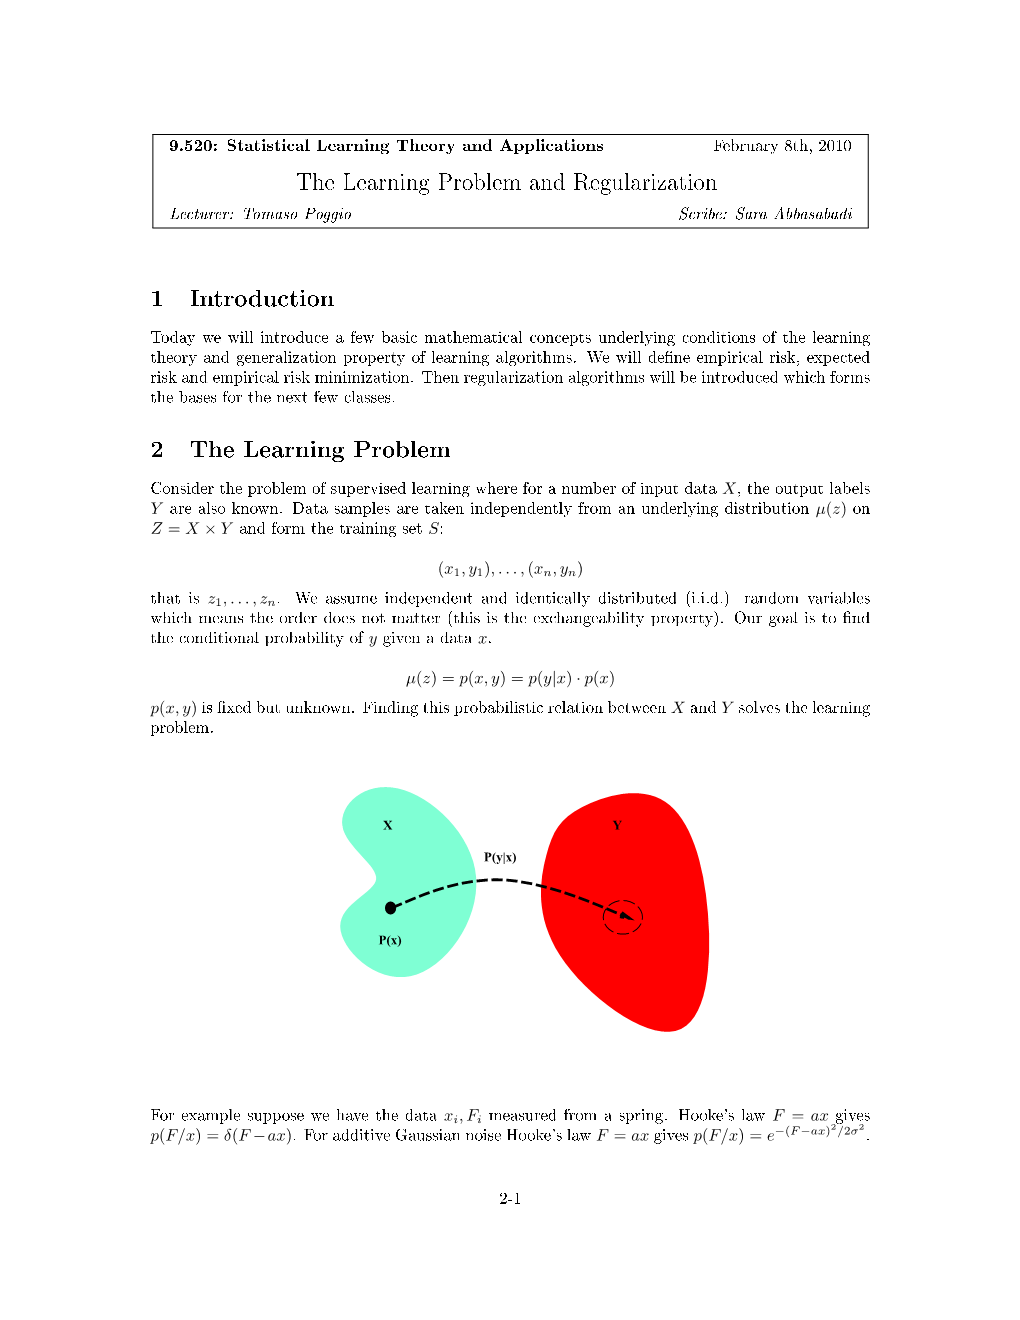 1 Introduction 2 the Learning Problem